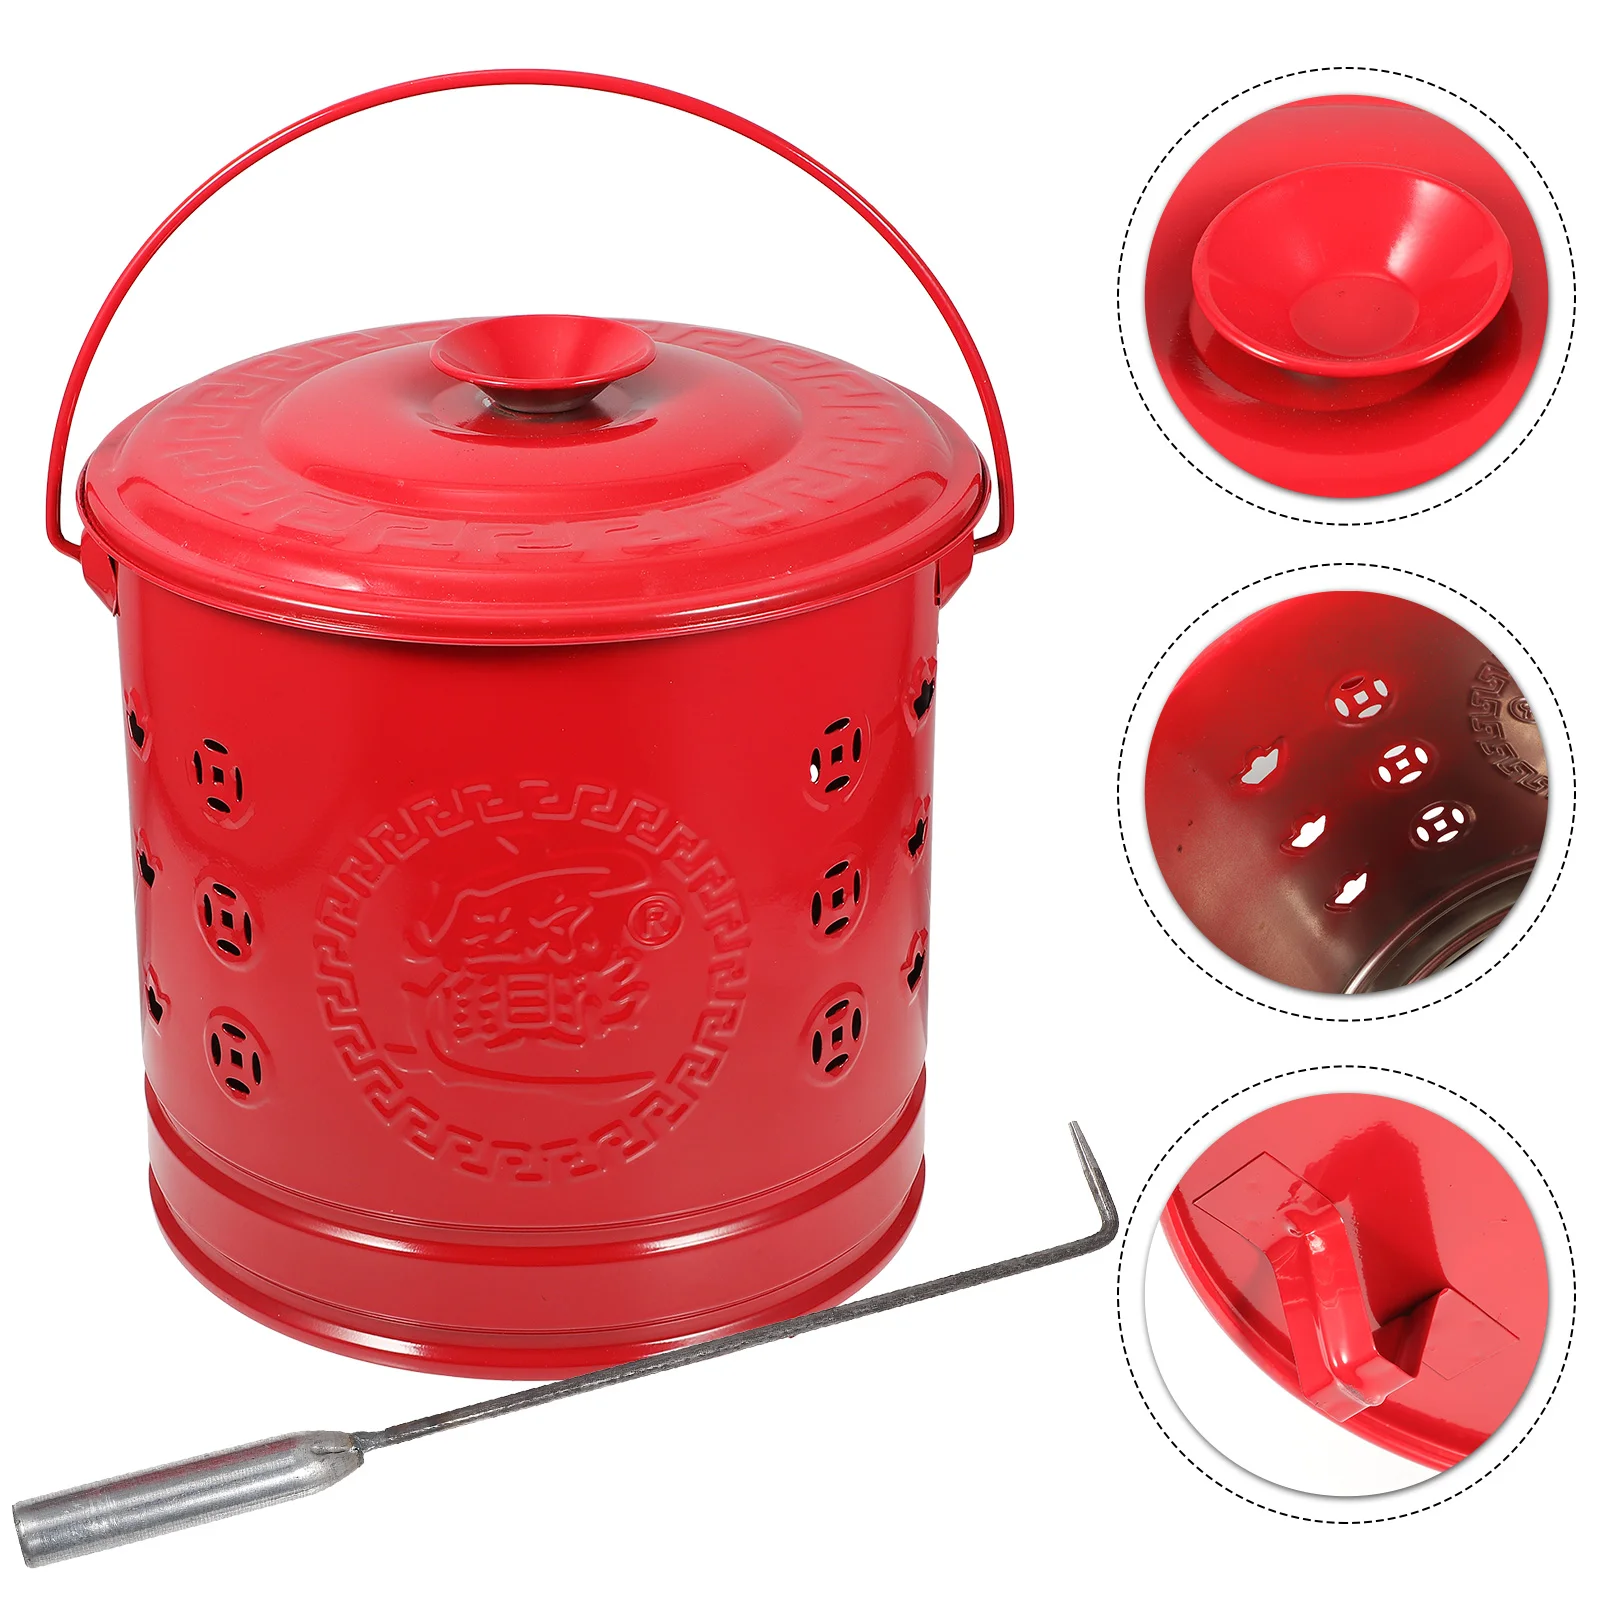 

Red Burning Barrel Treasure Inviting Enamel Worship Furnace Mini Trash Cans Stainless Steel Paper Money Bucket Outdoor Lid